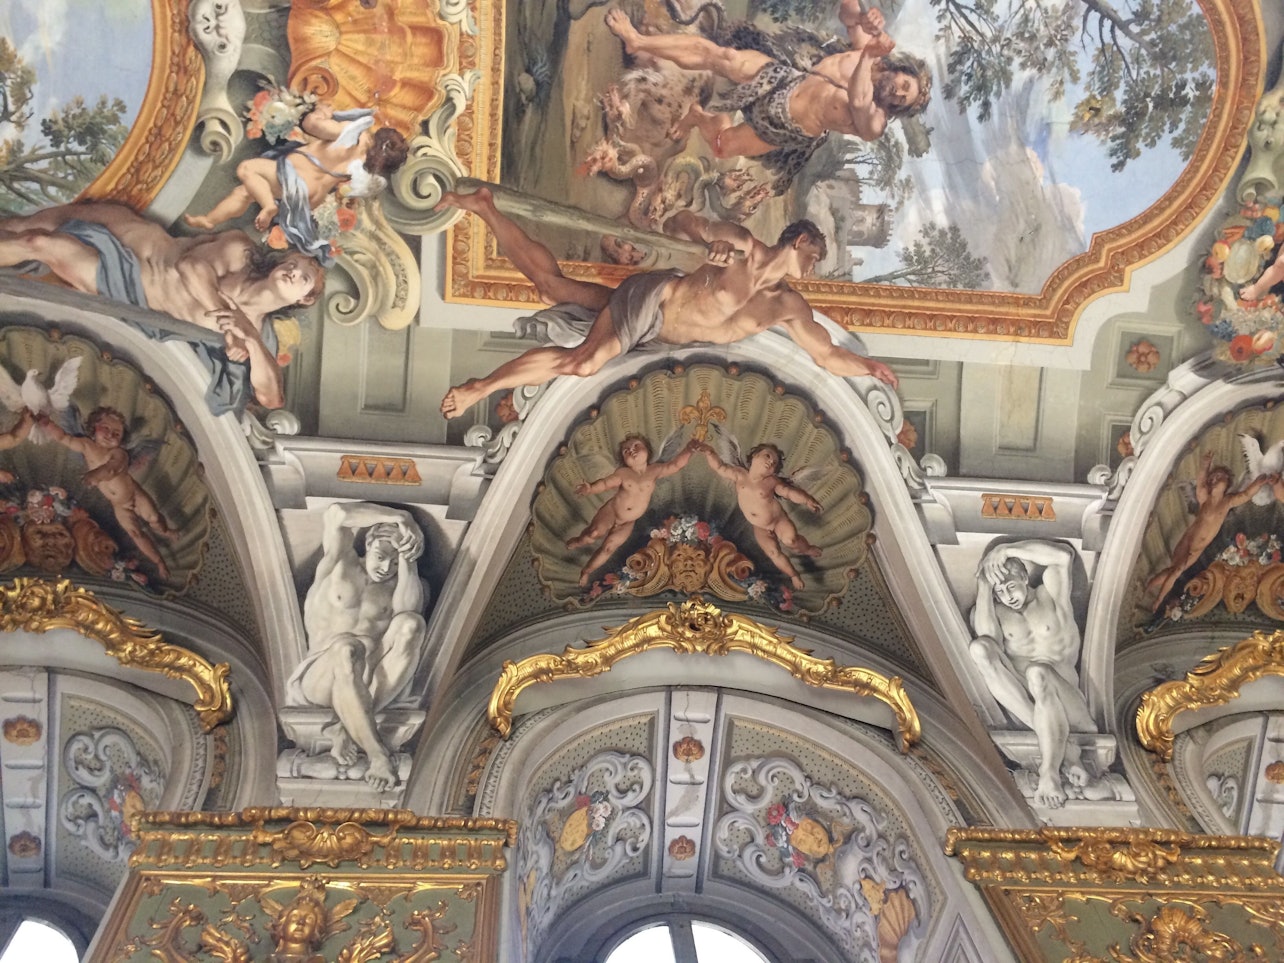 The Doria Pamphilj Gallery - Accommodations in Rome